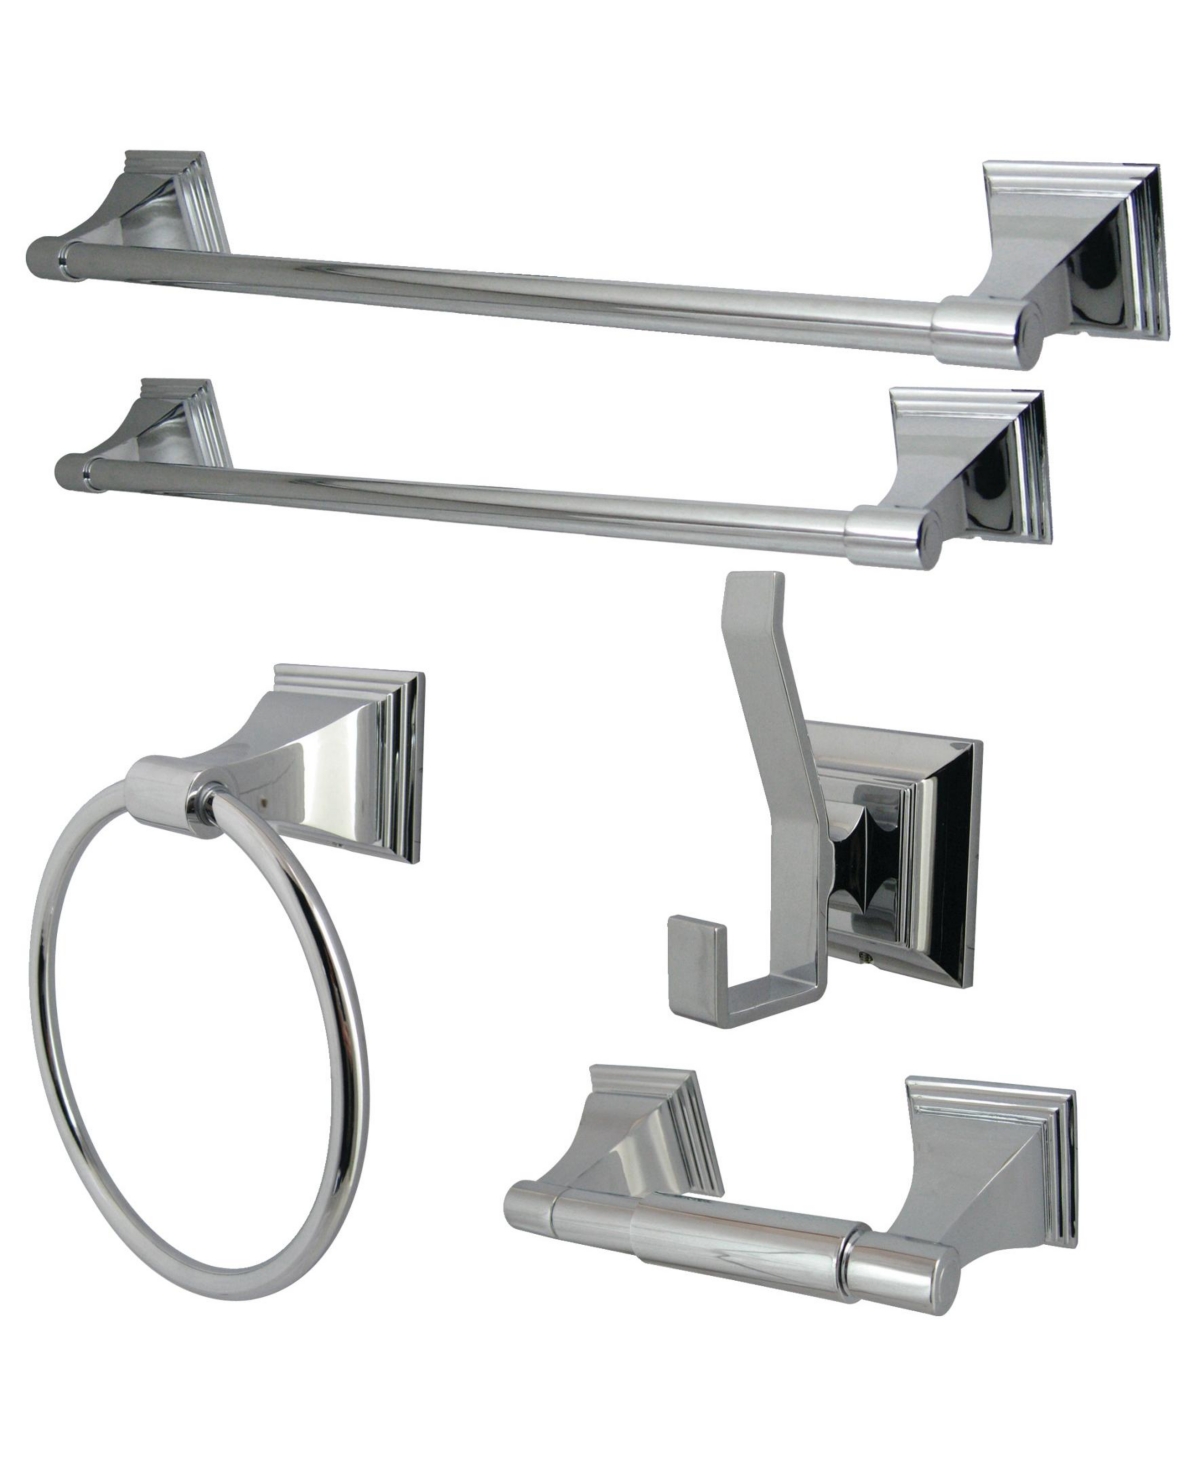 Kingston Brass Monarch 18-Inch and 24-Inch Towel Bar Bathroom Accessory Set in Polished Chrome Bedding